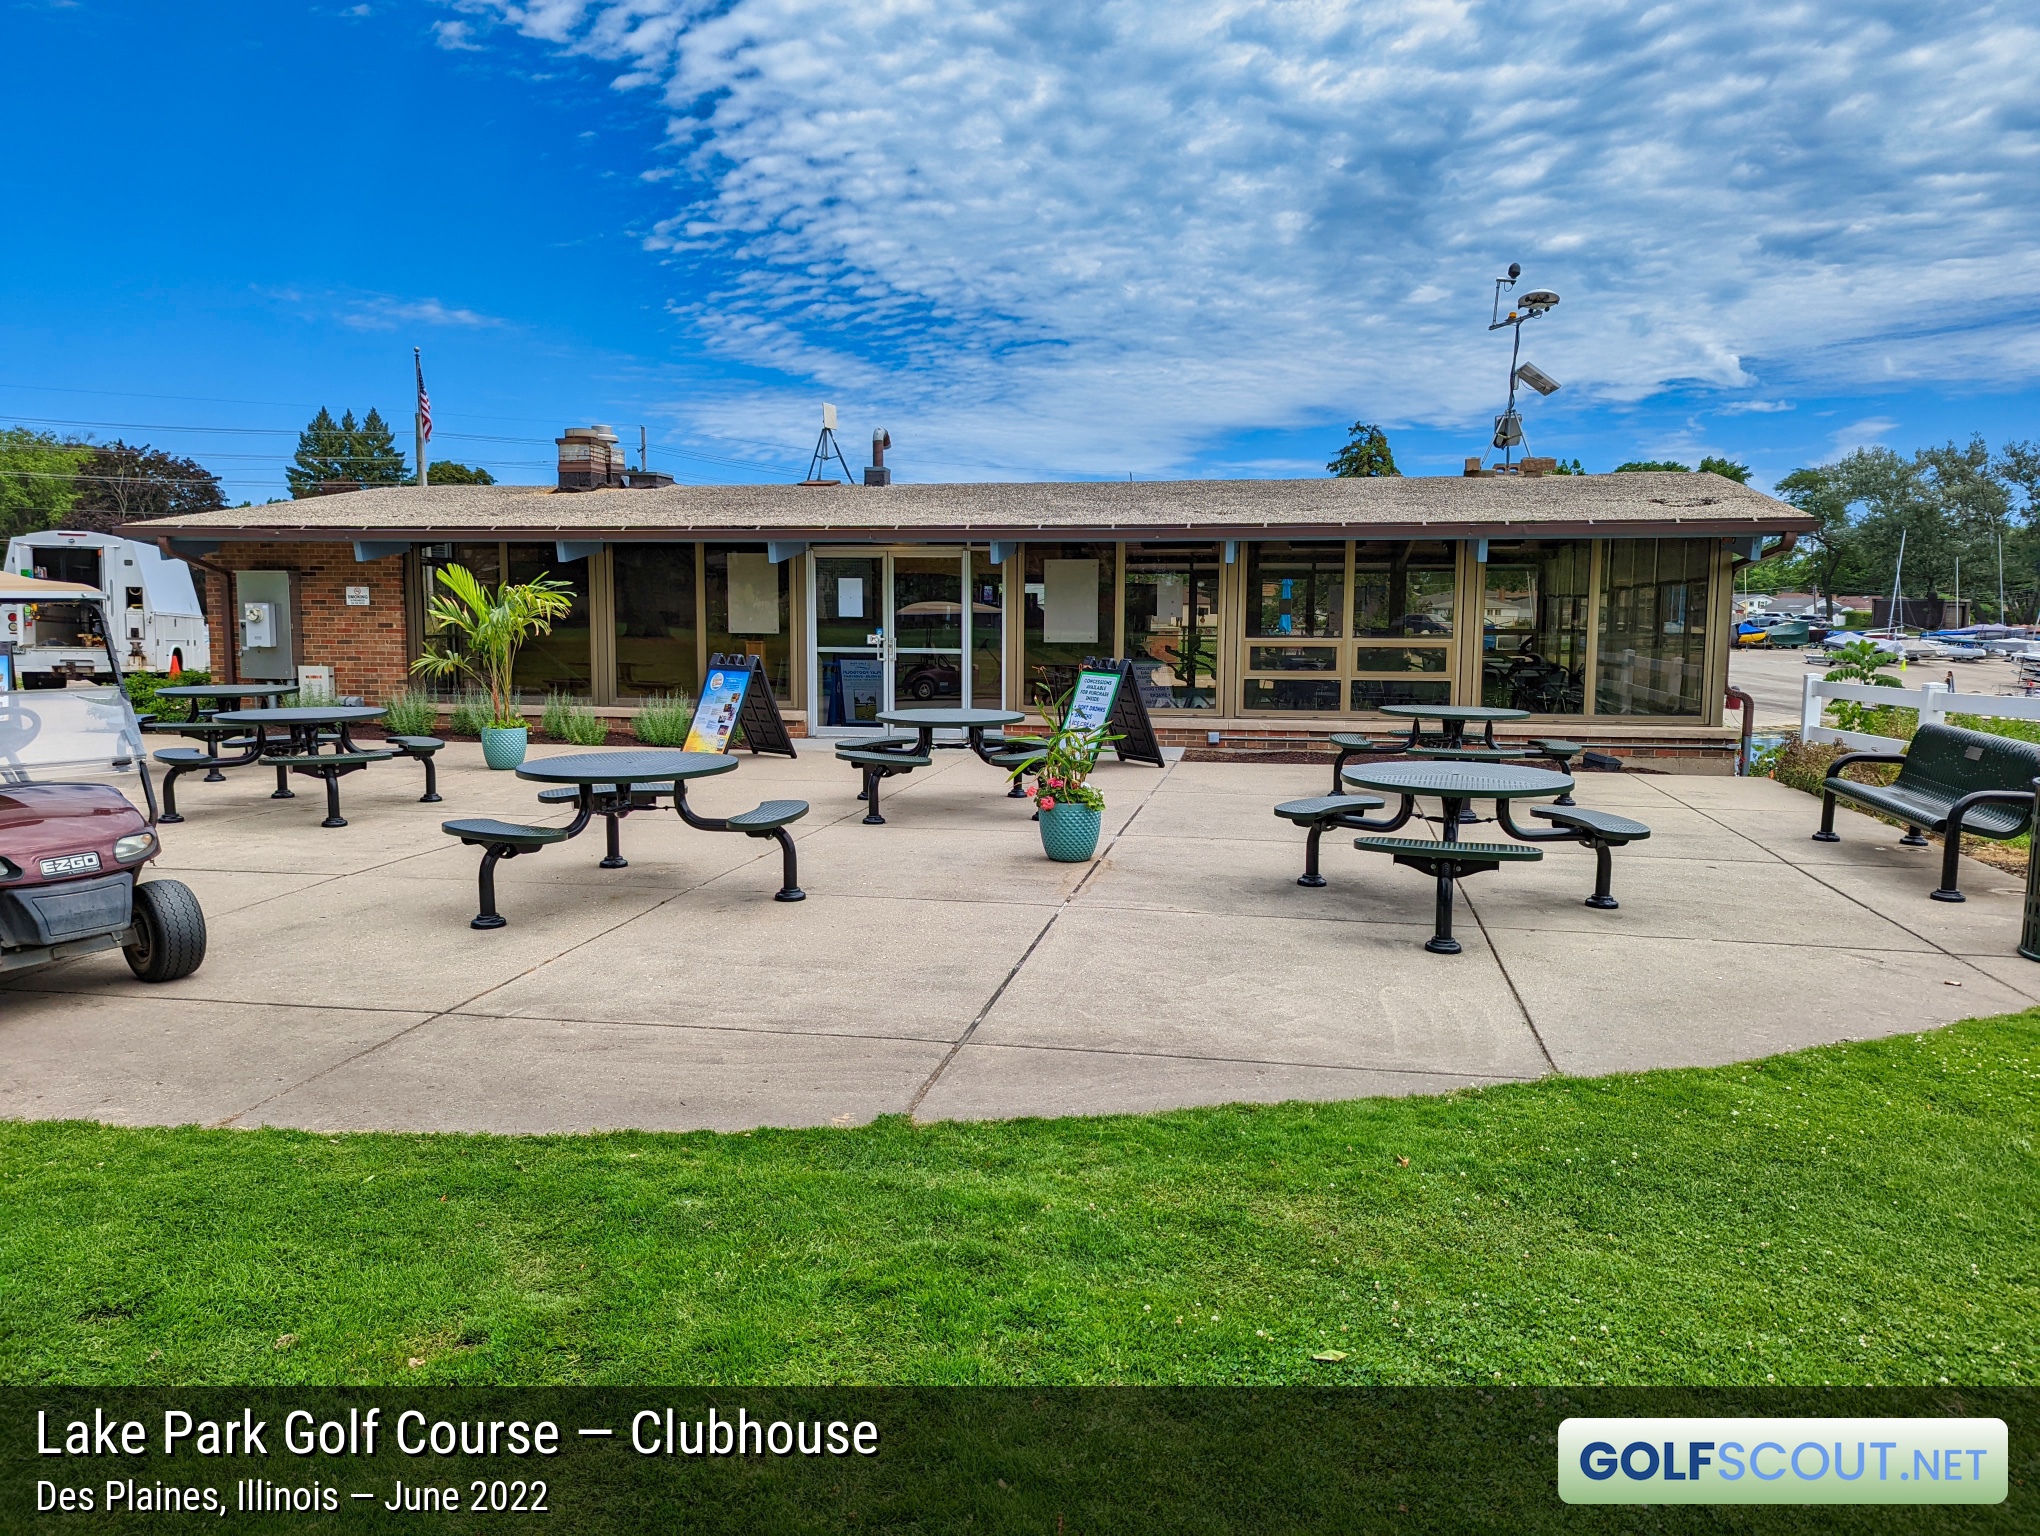 Photo of the clubhouse at Lake Park Golf Course in Des Plaines, Illinois. 